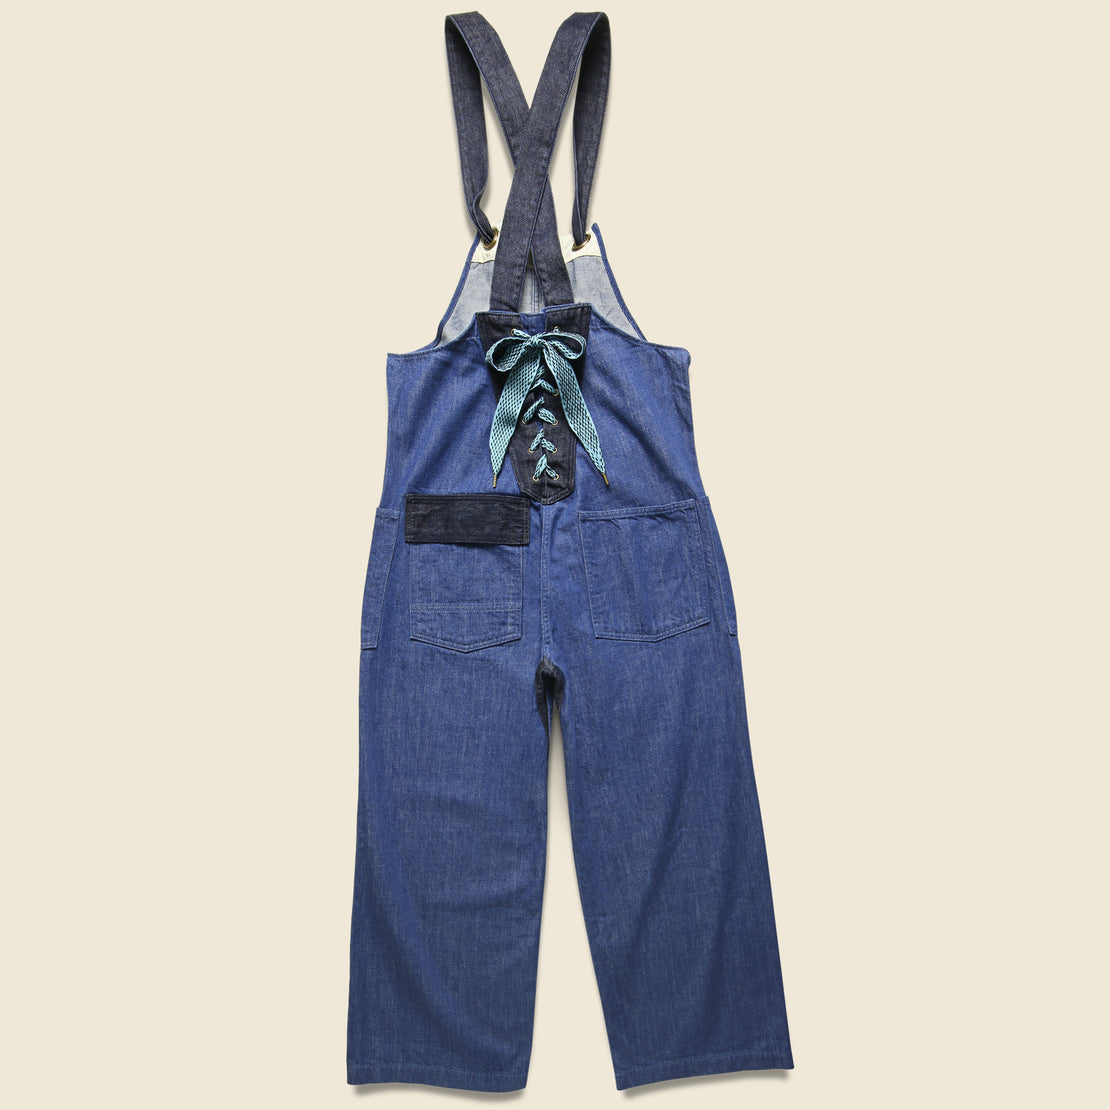 11.5oz Denim Lace-up Lobster Man Slopette Overalls - Indigo - Kapital - STAG Provisions - W - Onepiece - Overalls